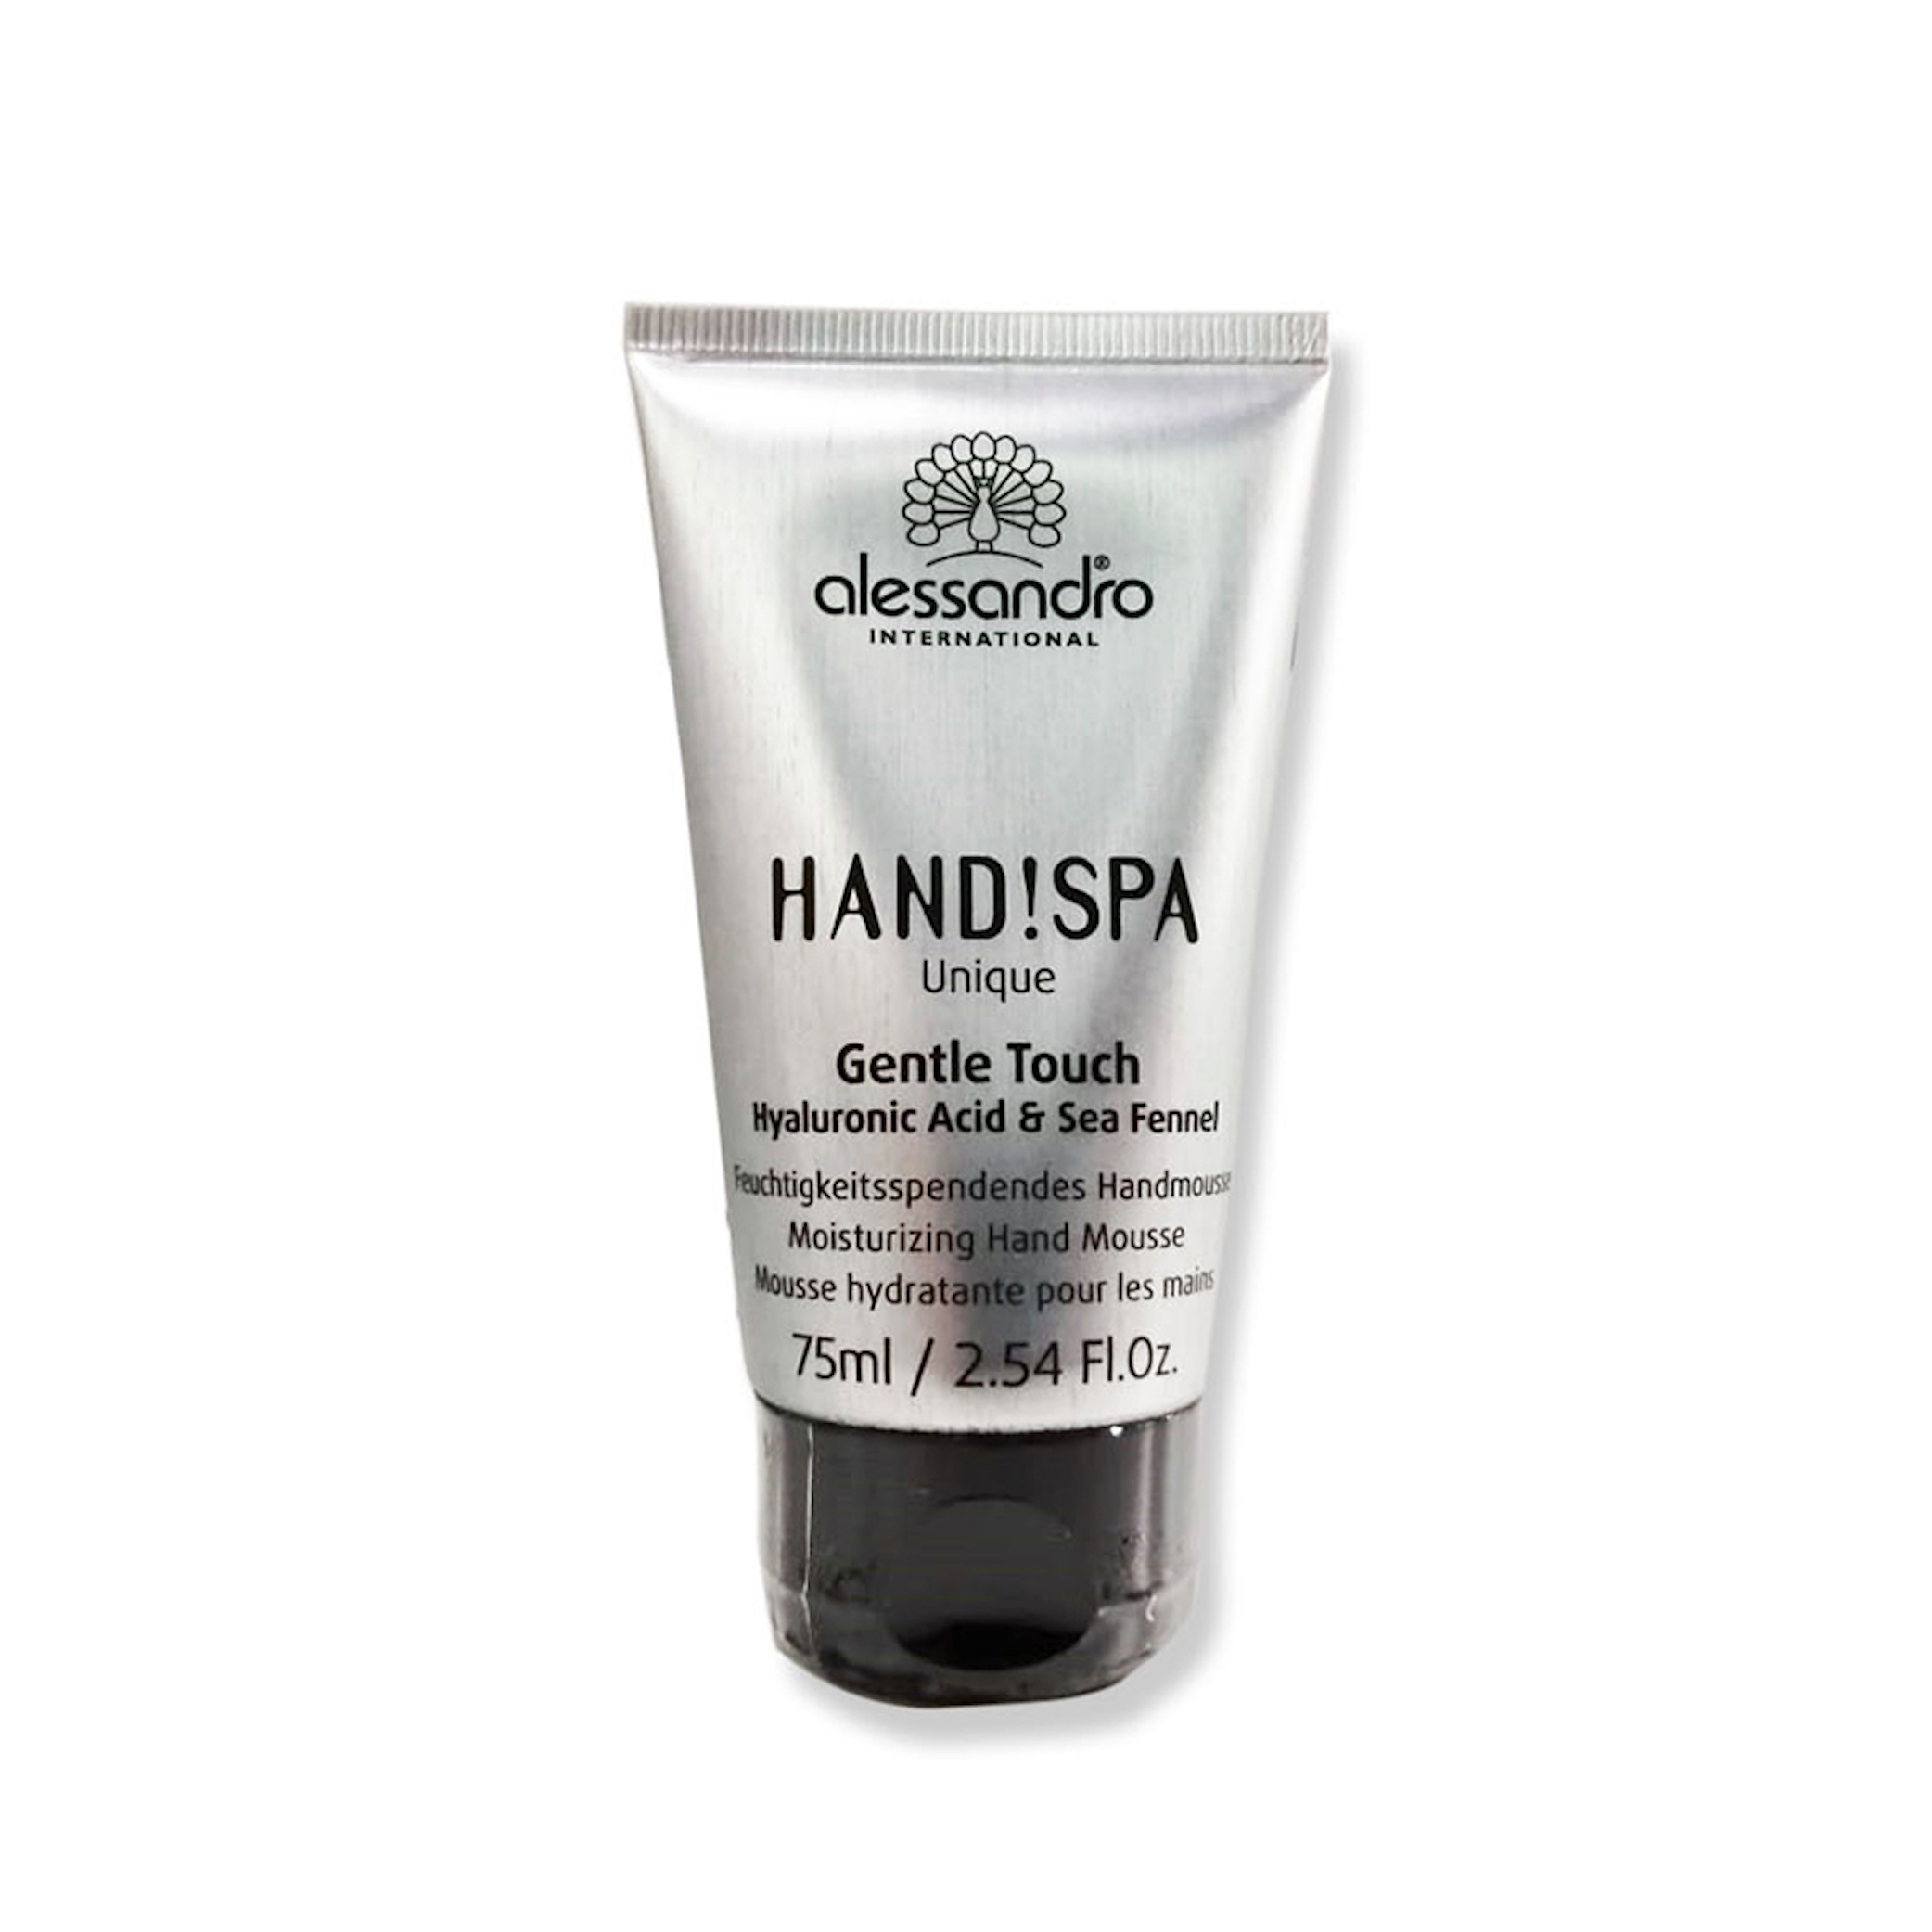 Alessandro Hand Spa Unique Gentle Touch 75 ml | Wholesale Prices | Tradeling